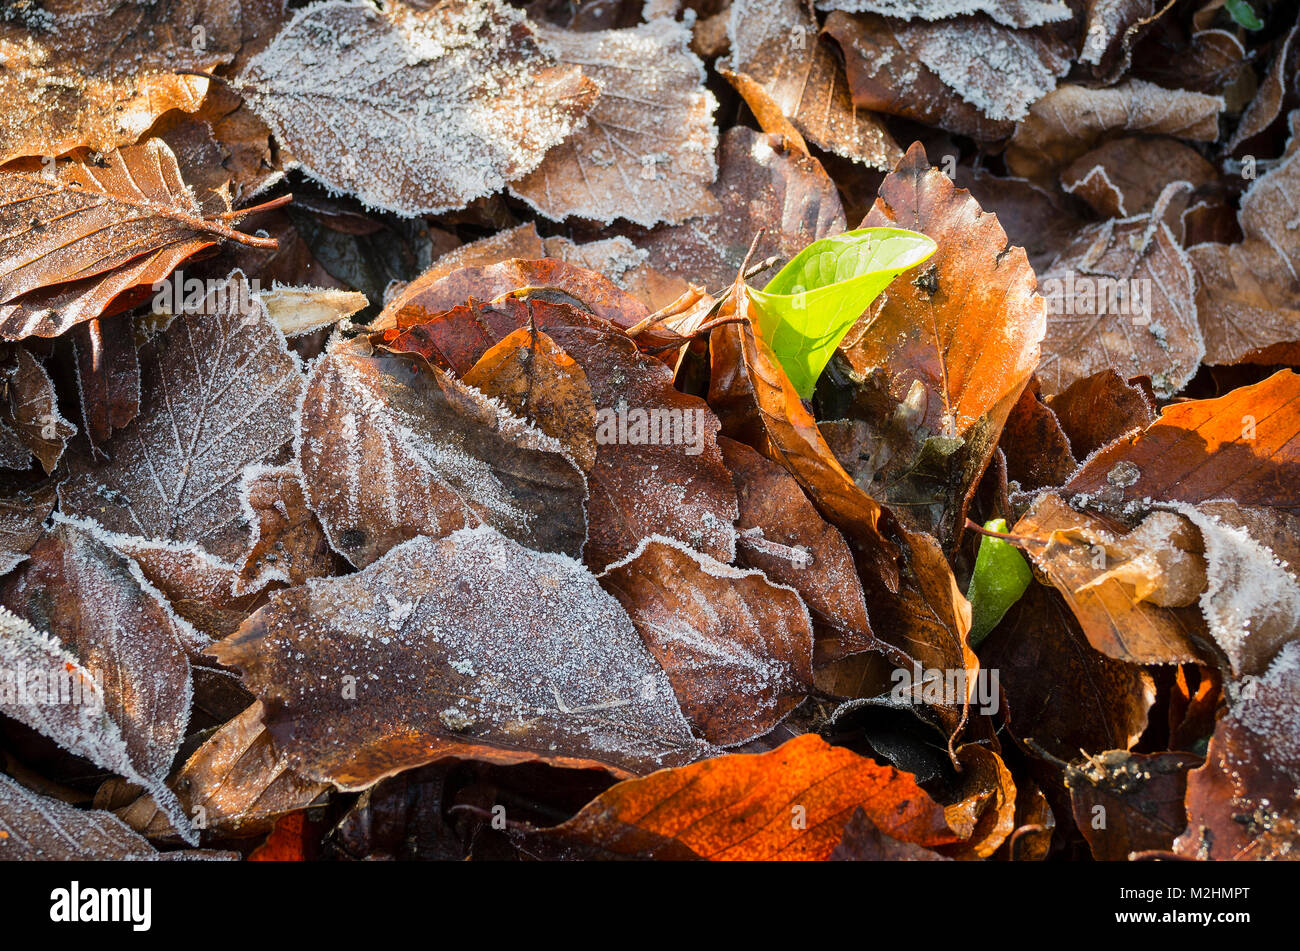 A winter mulch of autumn leaves helps to protect dormant plants in winter in Wiltshire England UK. First signs of new life emerge in late January Stock Photo